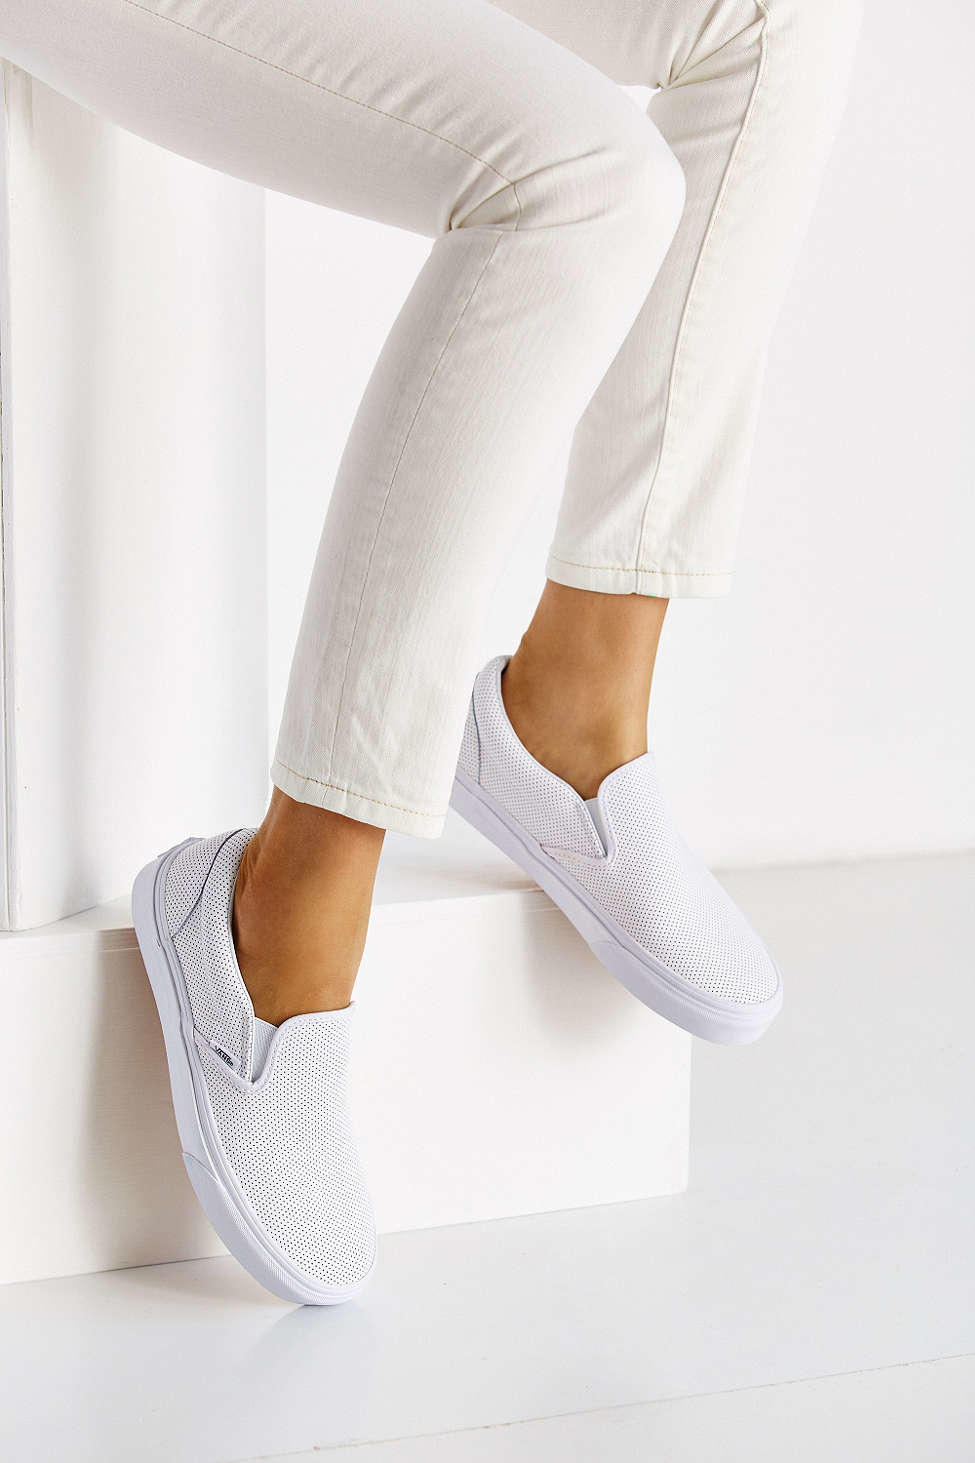 Lyst - Vans Perforated Leather Slip-on Sneaker in White